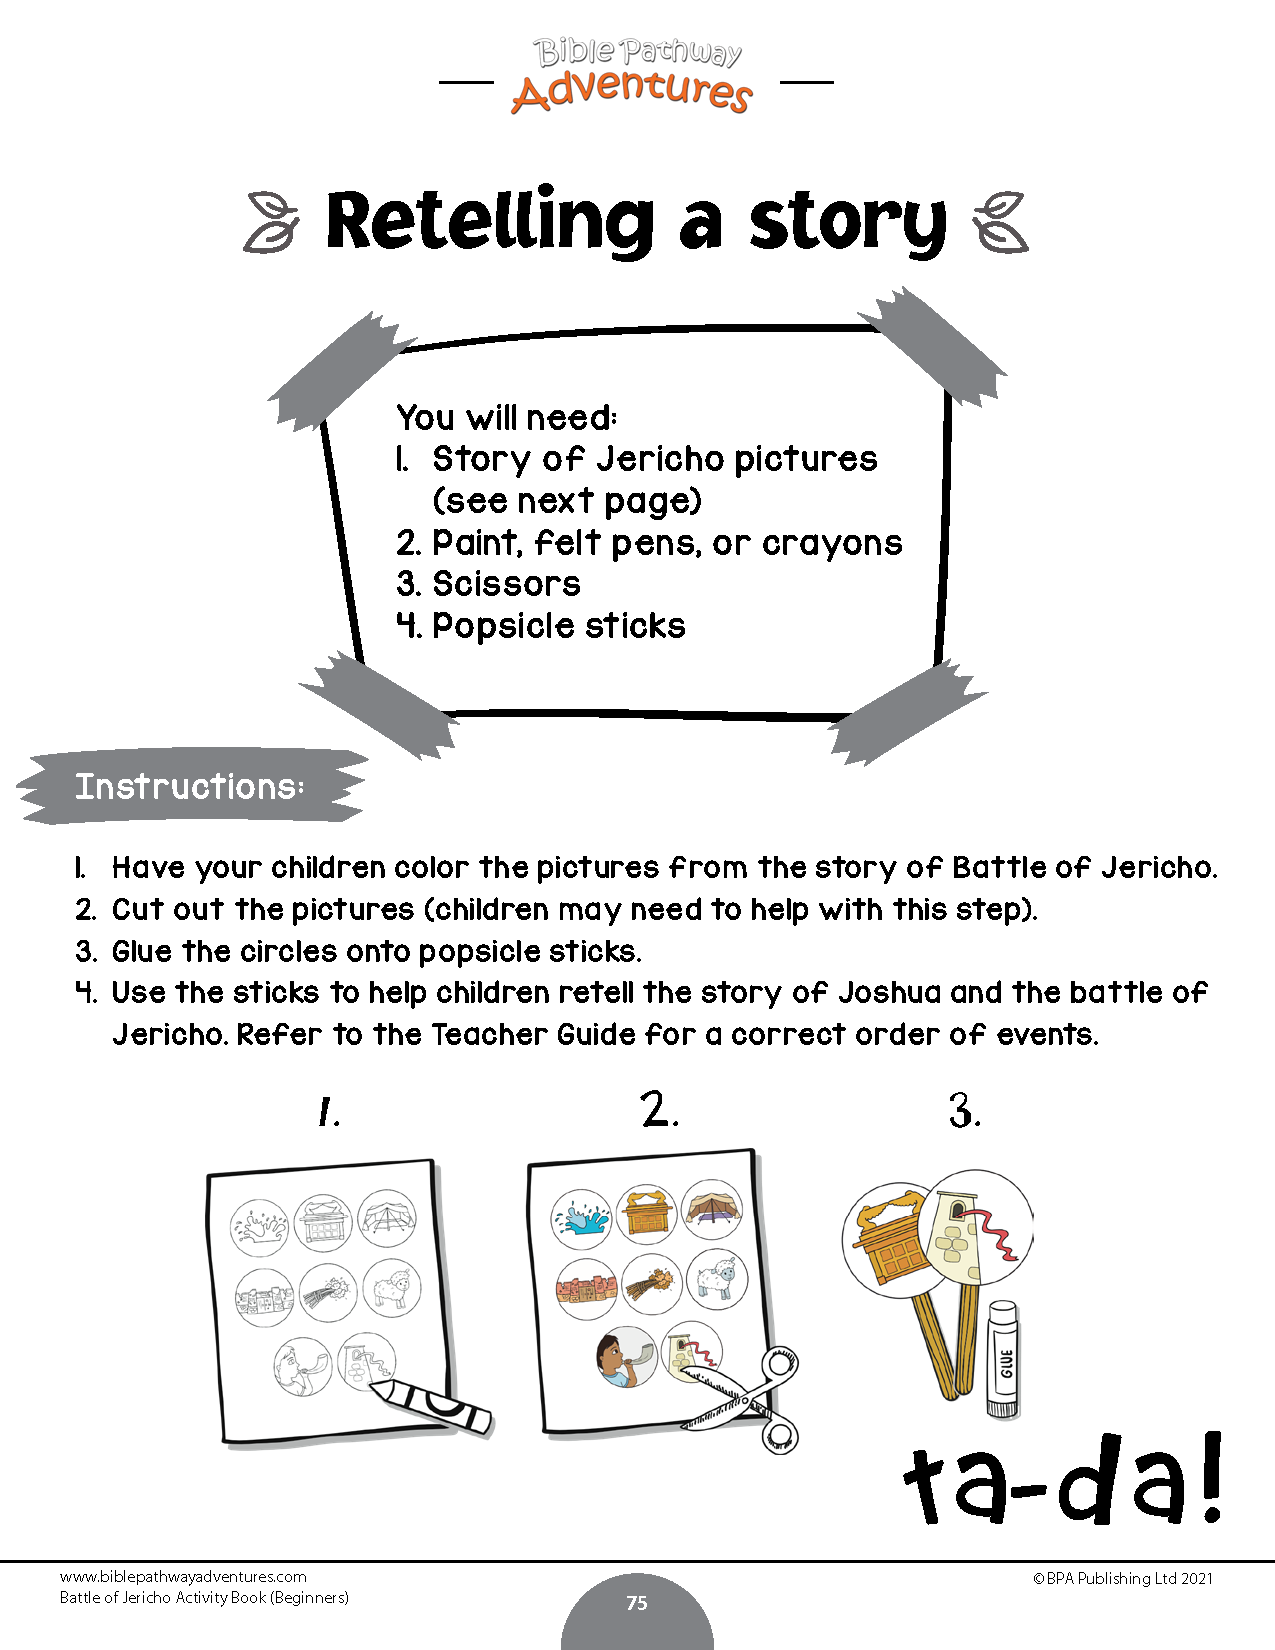 Battle of Jericho Activity Book for Beginners